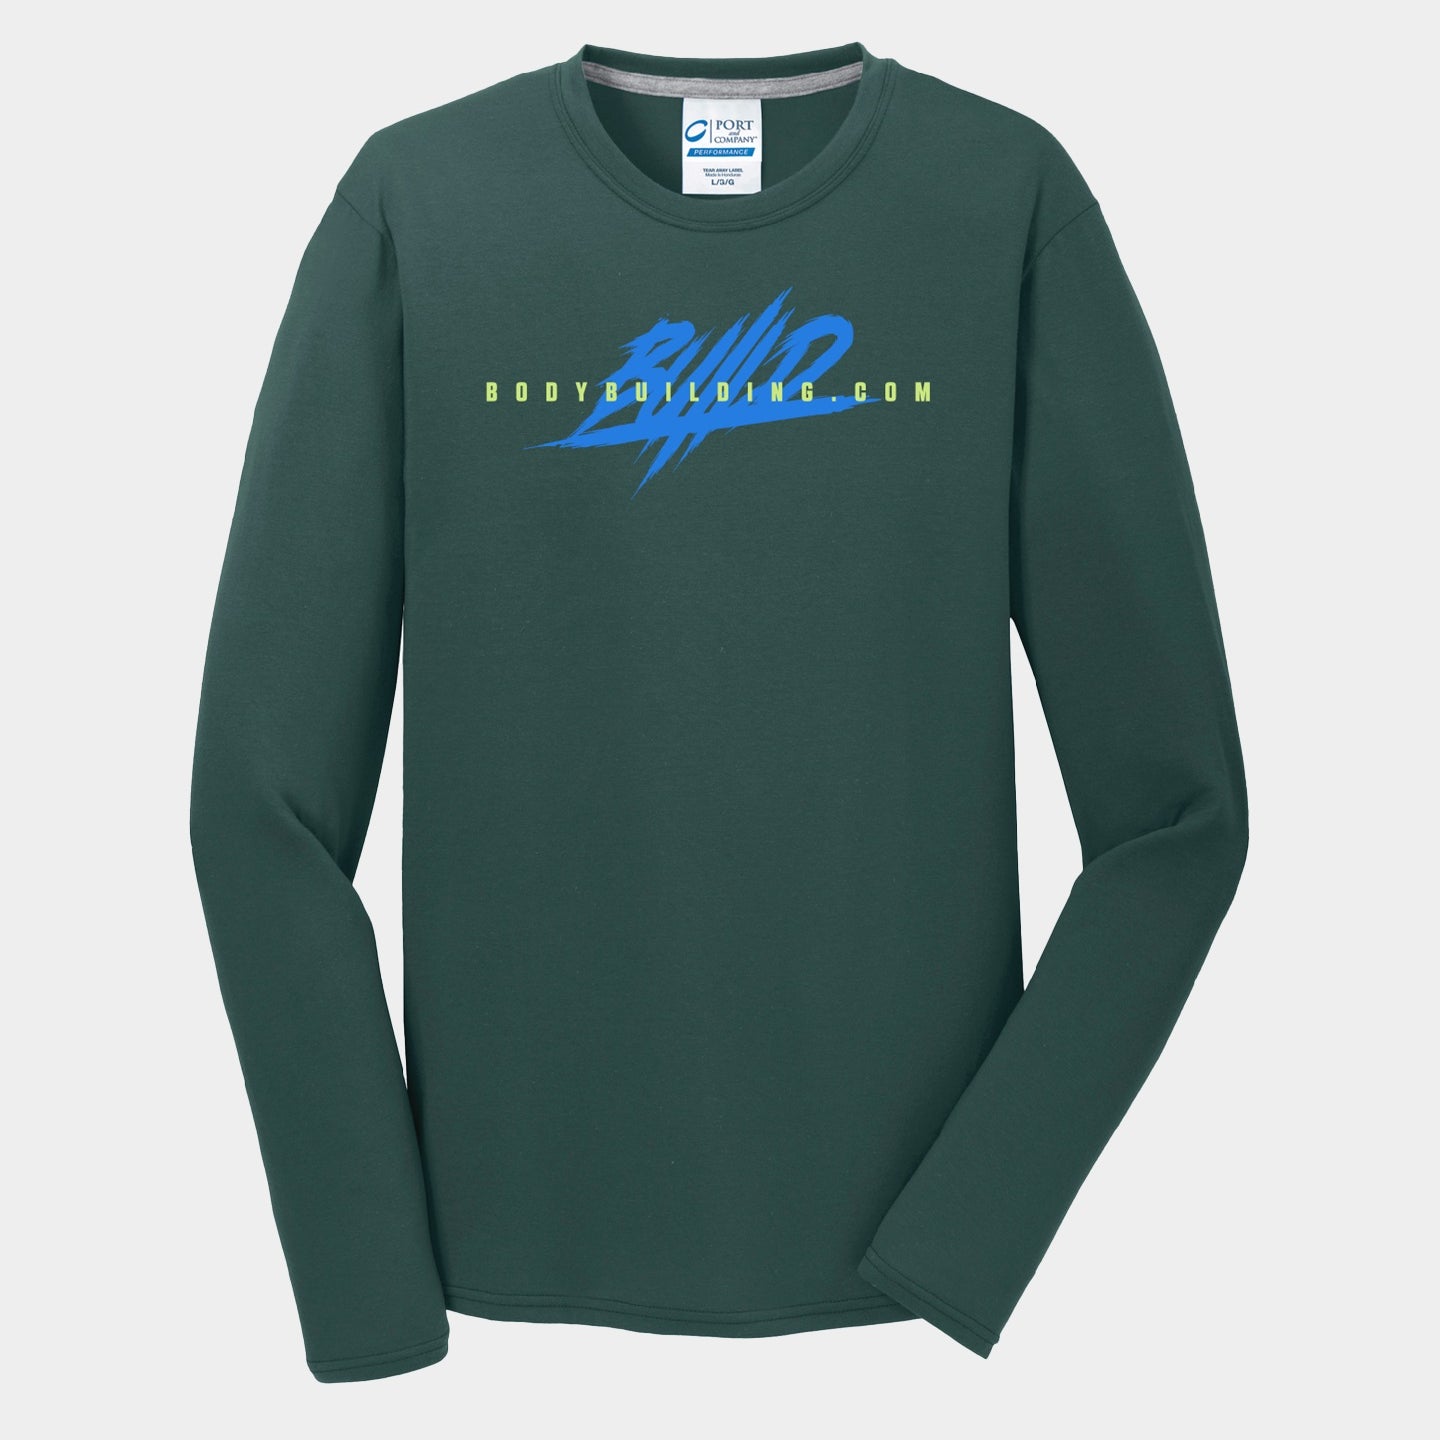 Bodybuilding.com Clothing Above the Rest Long Sleeve